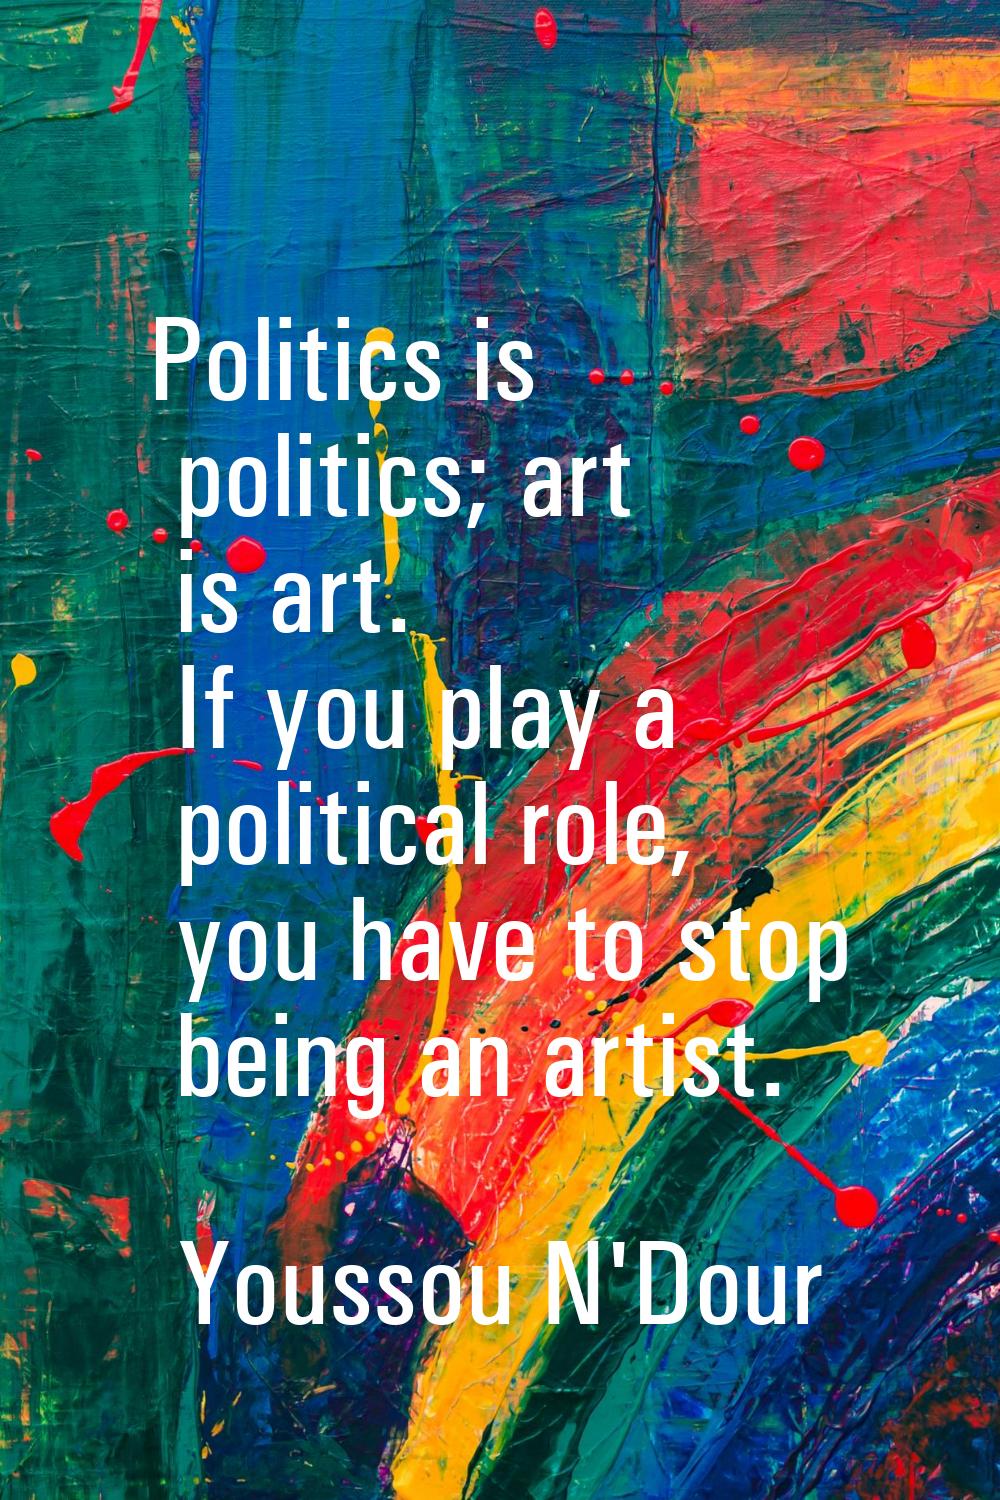 Politics is politics; art is art. If you play a political role, you have to stop being an artist.